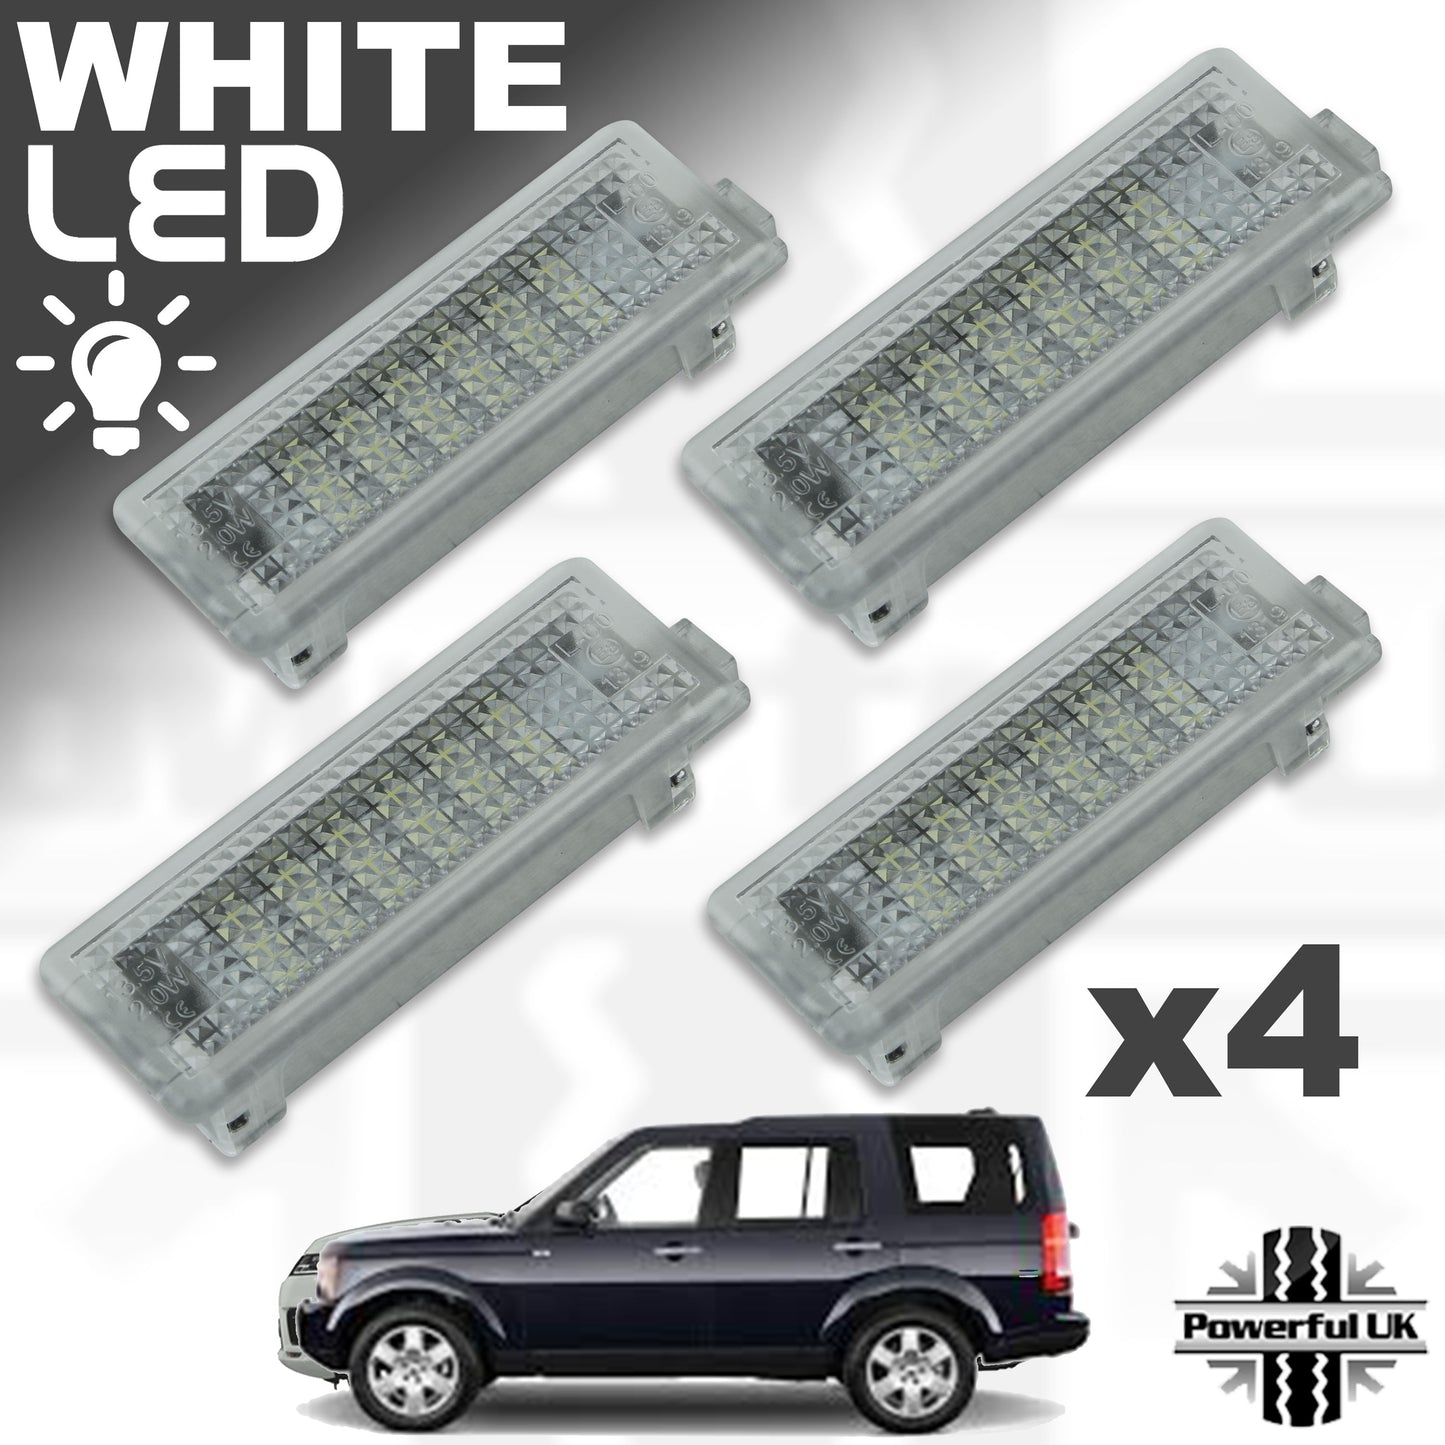 WHITE LED Door Courtesy Lights for Land Rover Discovery 3 & 4 (4pc)